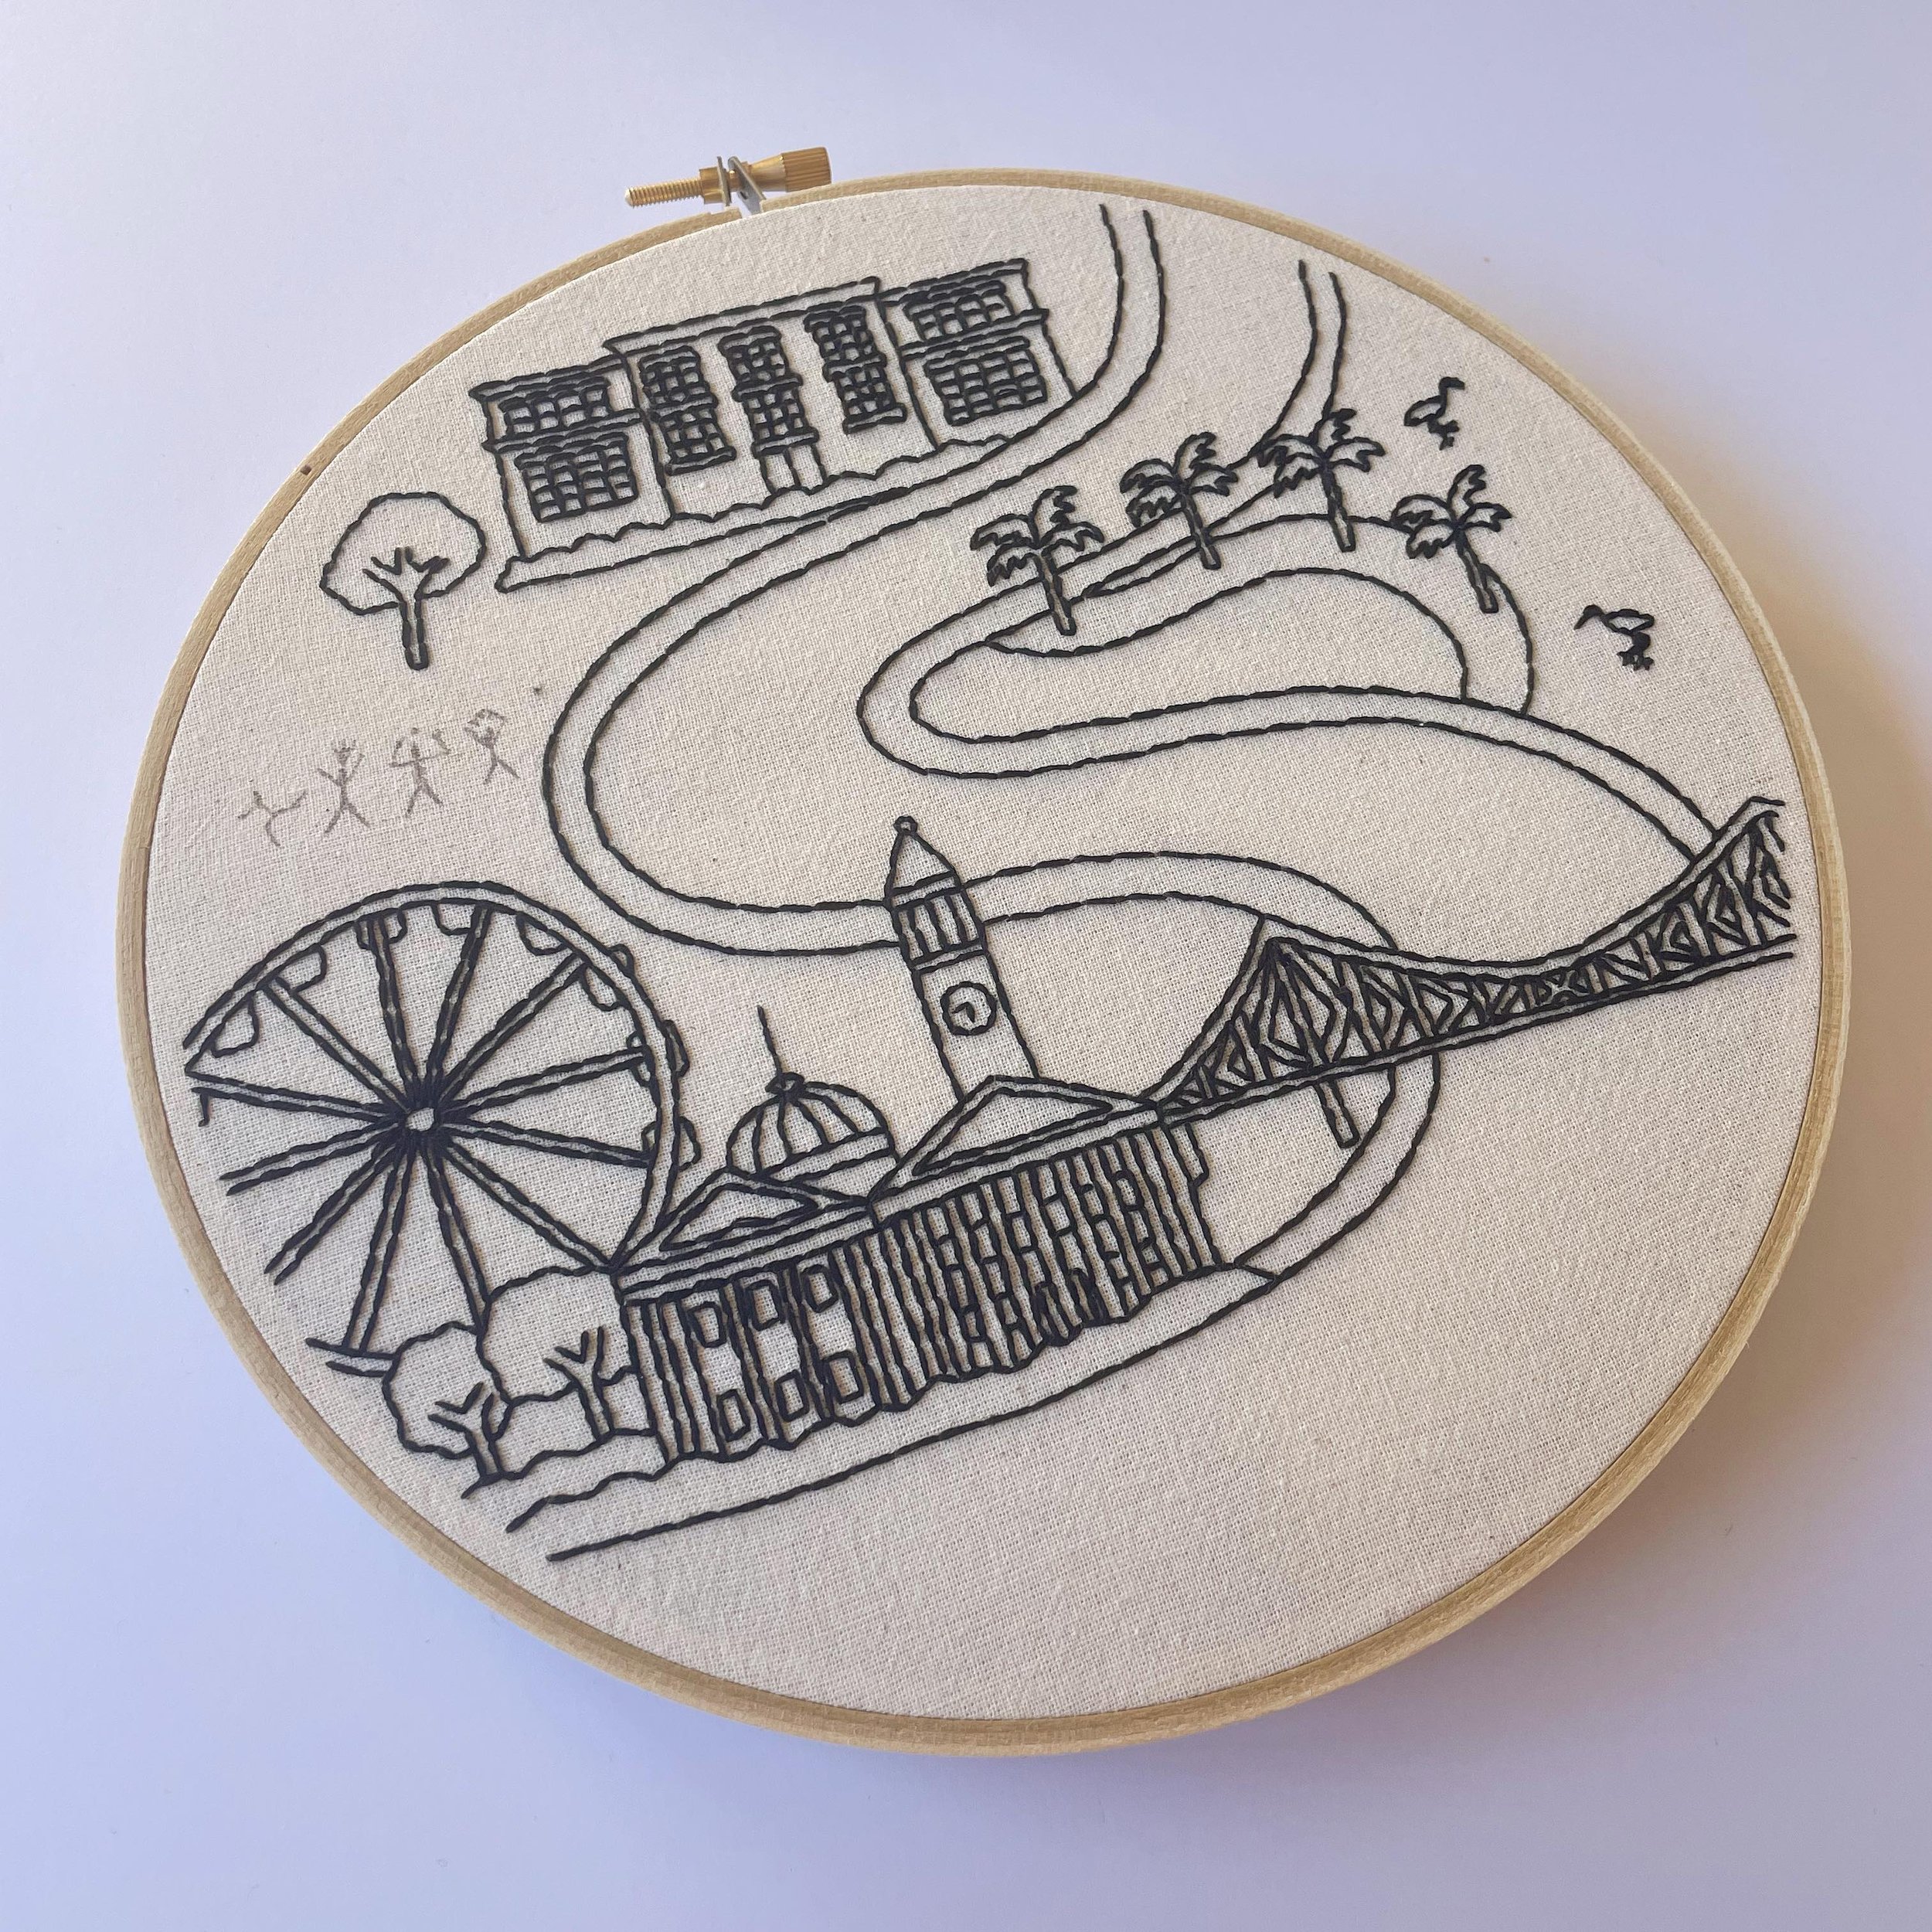 I&rsquo;ve been working on something exciting that involves stitching some wonderful Meanjin/Brisbane icons! I haven&rsquo;t really visited so I asked Google and Instagram to help me choose some prominent landmarks - I&rsquo;ve included Brisbane Powe